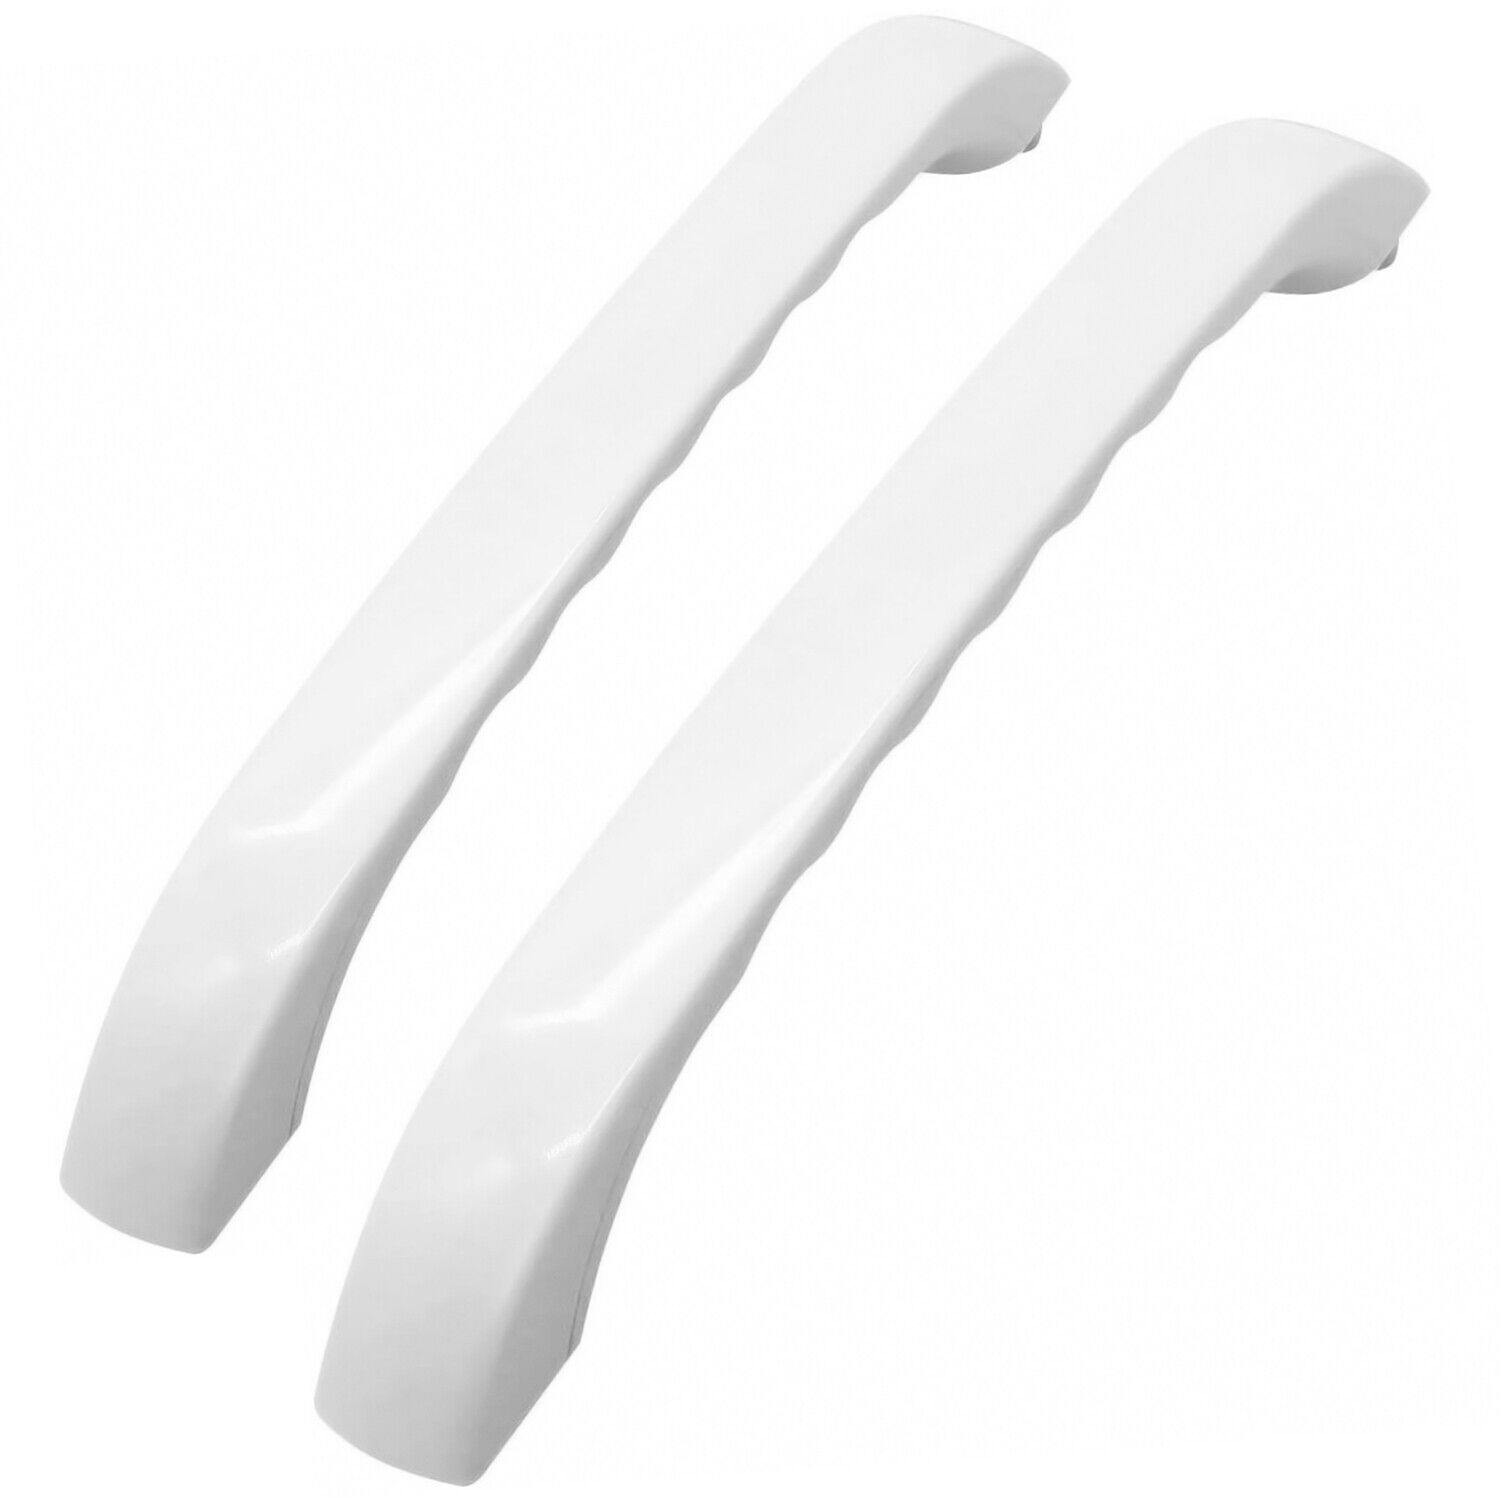 2 Pack WB15X335 NEW White Door Handle Fits GE Microwave PS232260 AP2021148